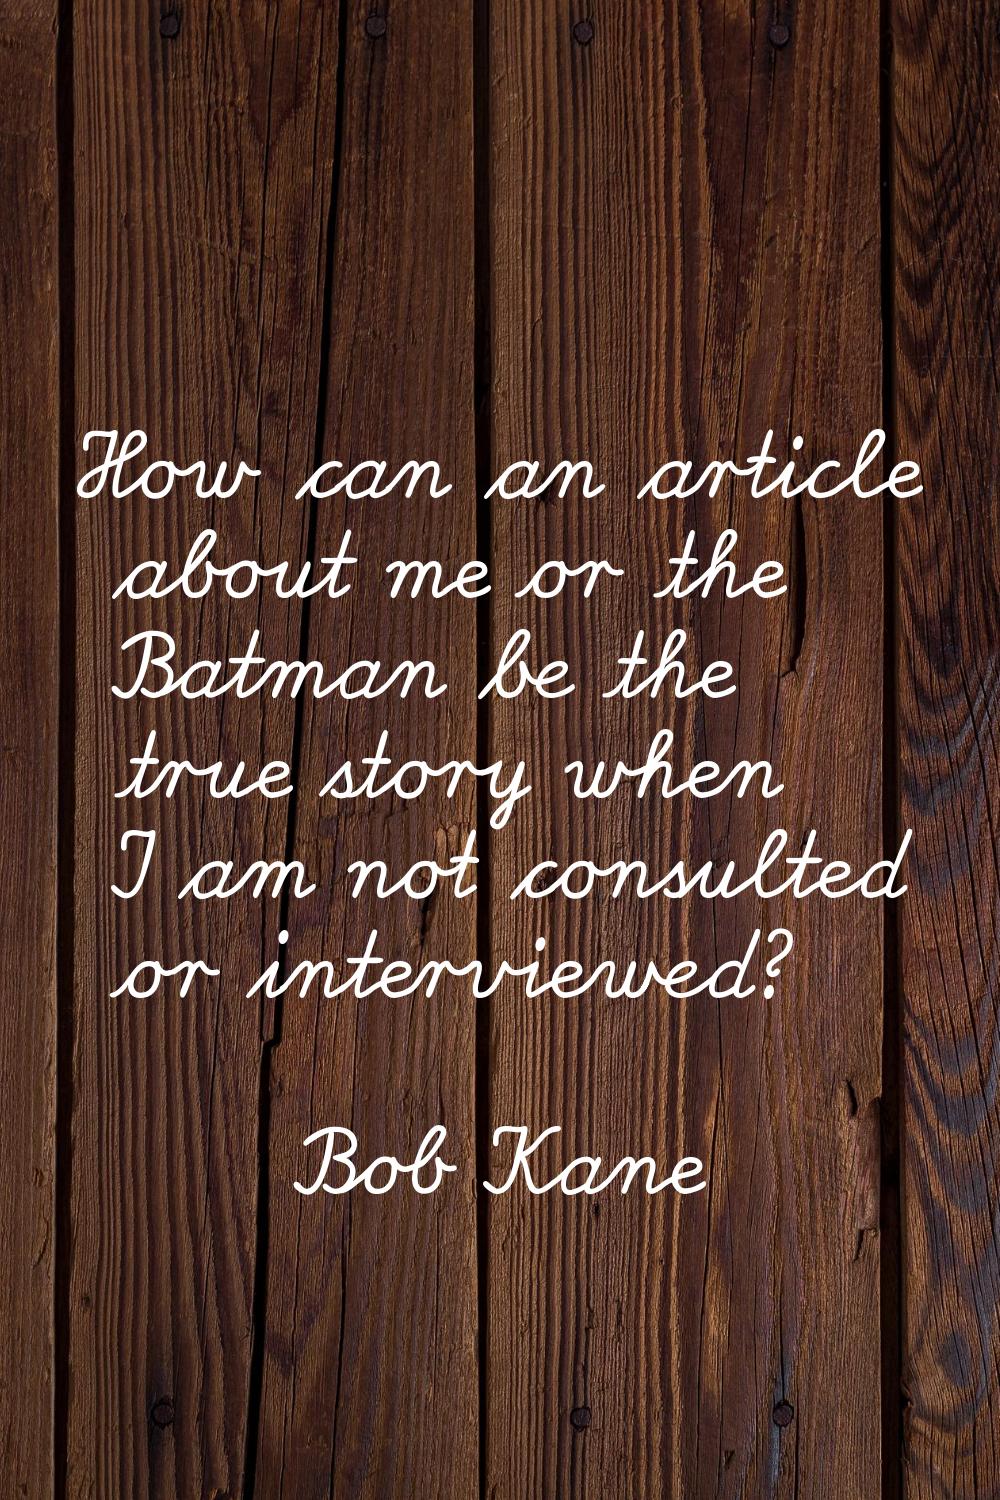 How can an article about me or the Batman be the true story when I am not consulted or interviewed?